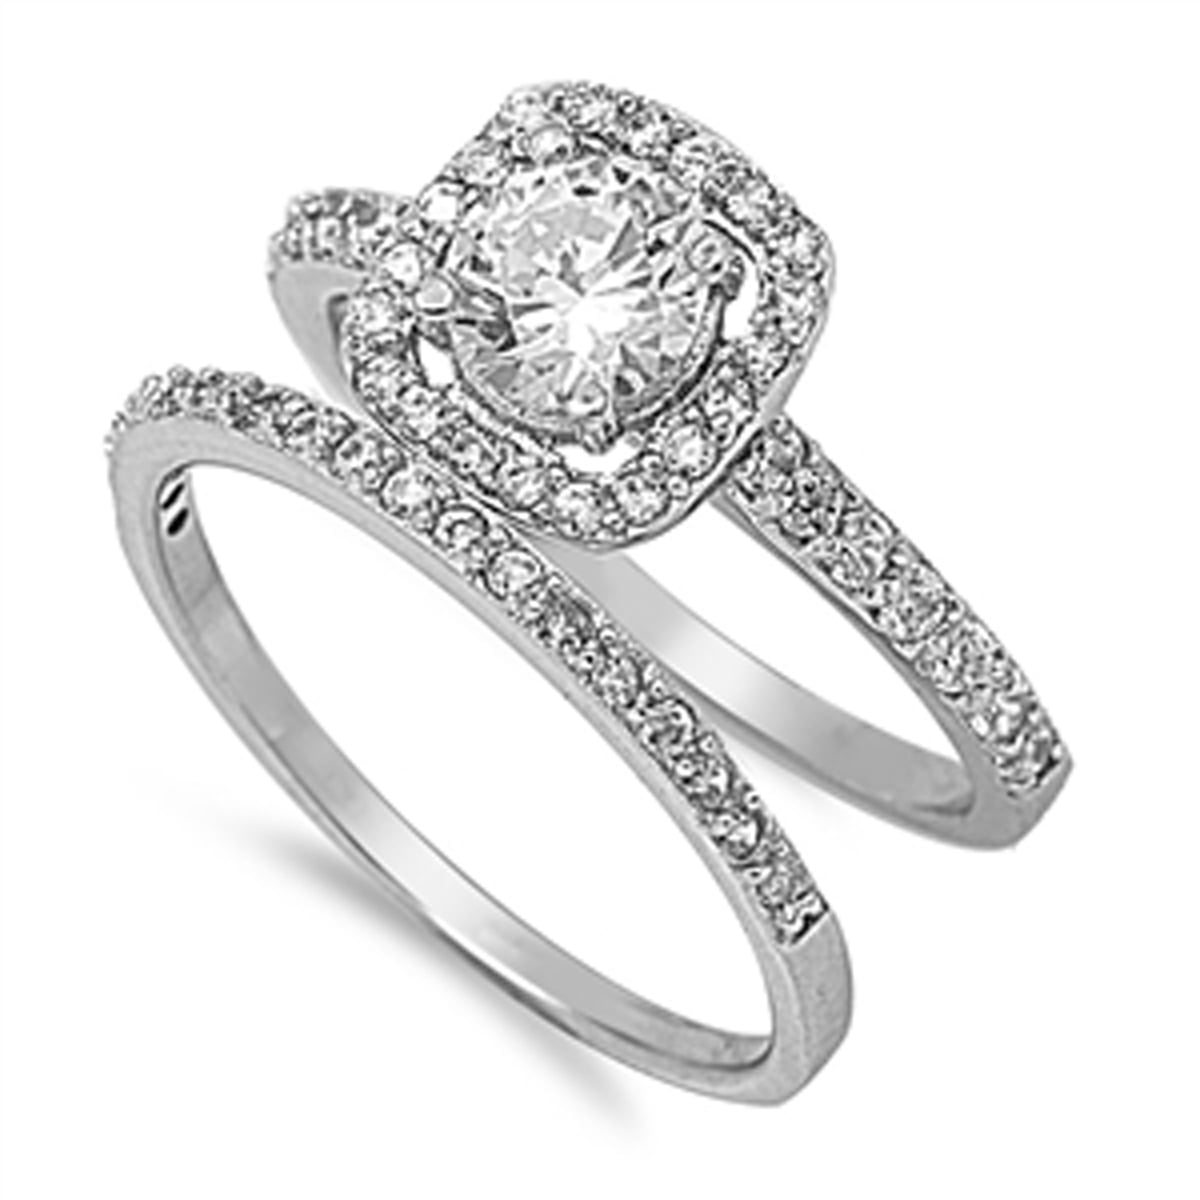 Sterling Silver Womens Colorless Cubic Zirconia Round Solitaire Wedding Set Ring Sizes 5-10